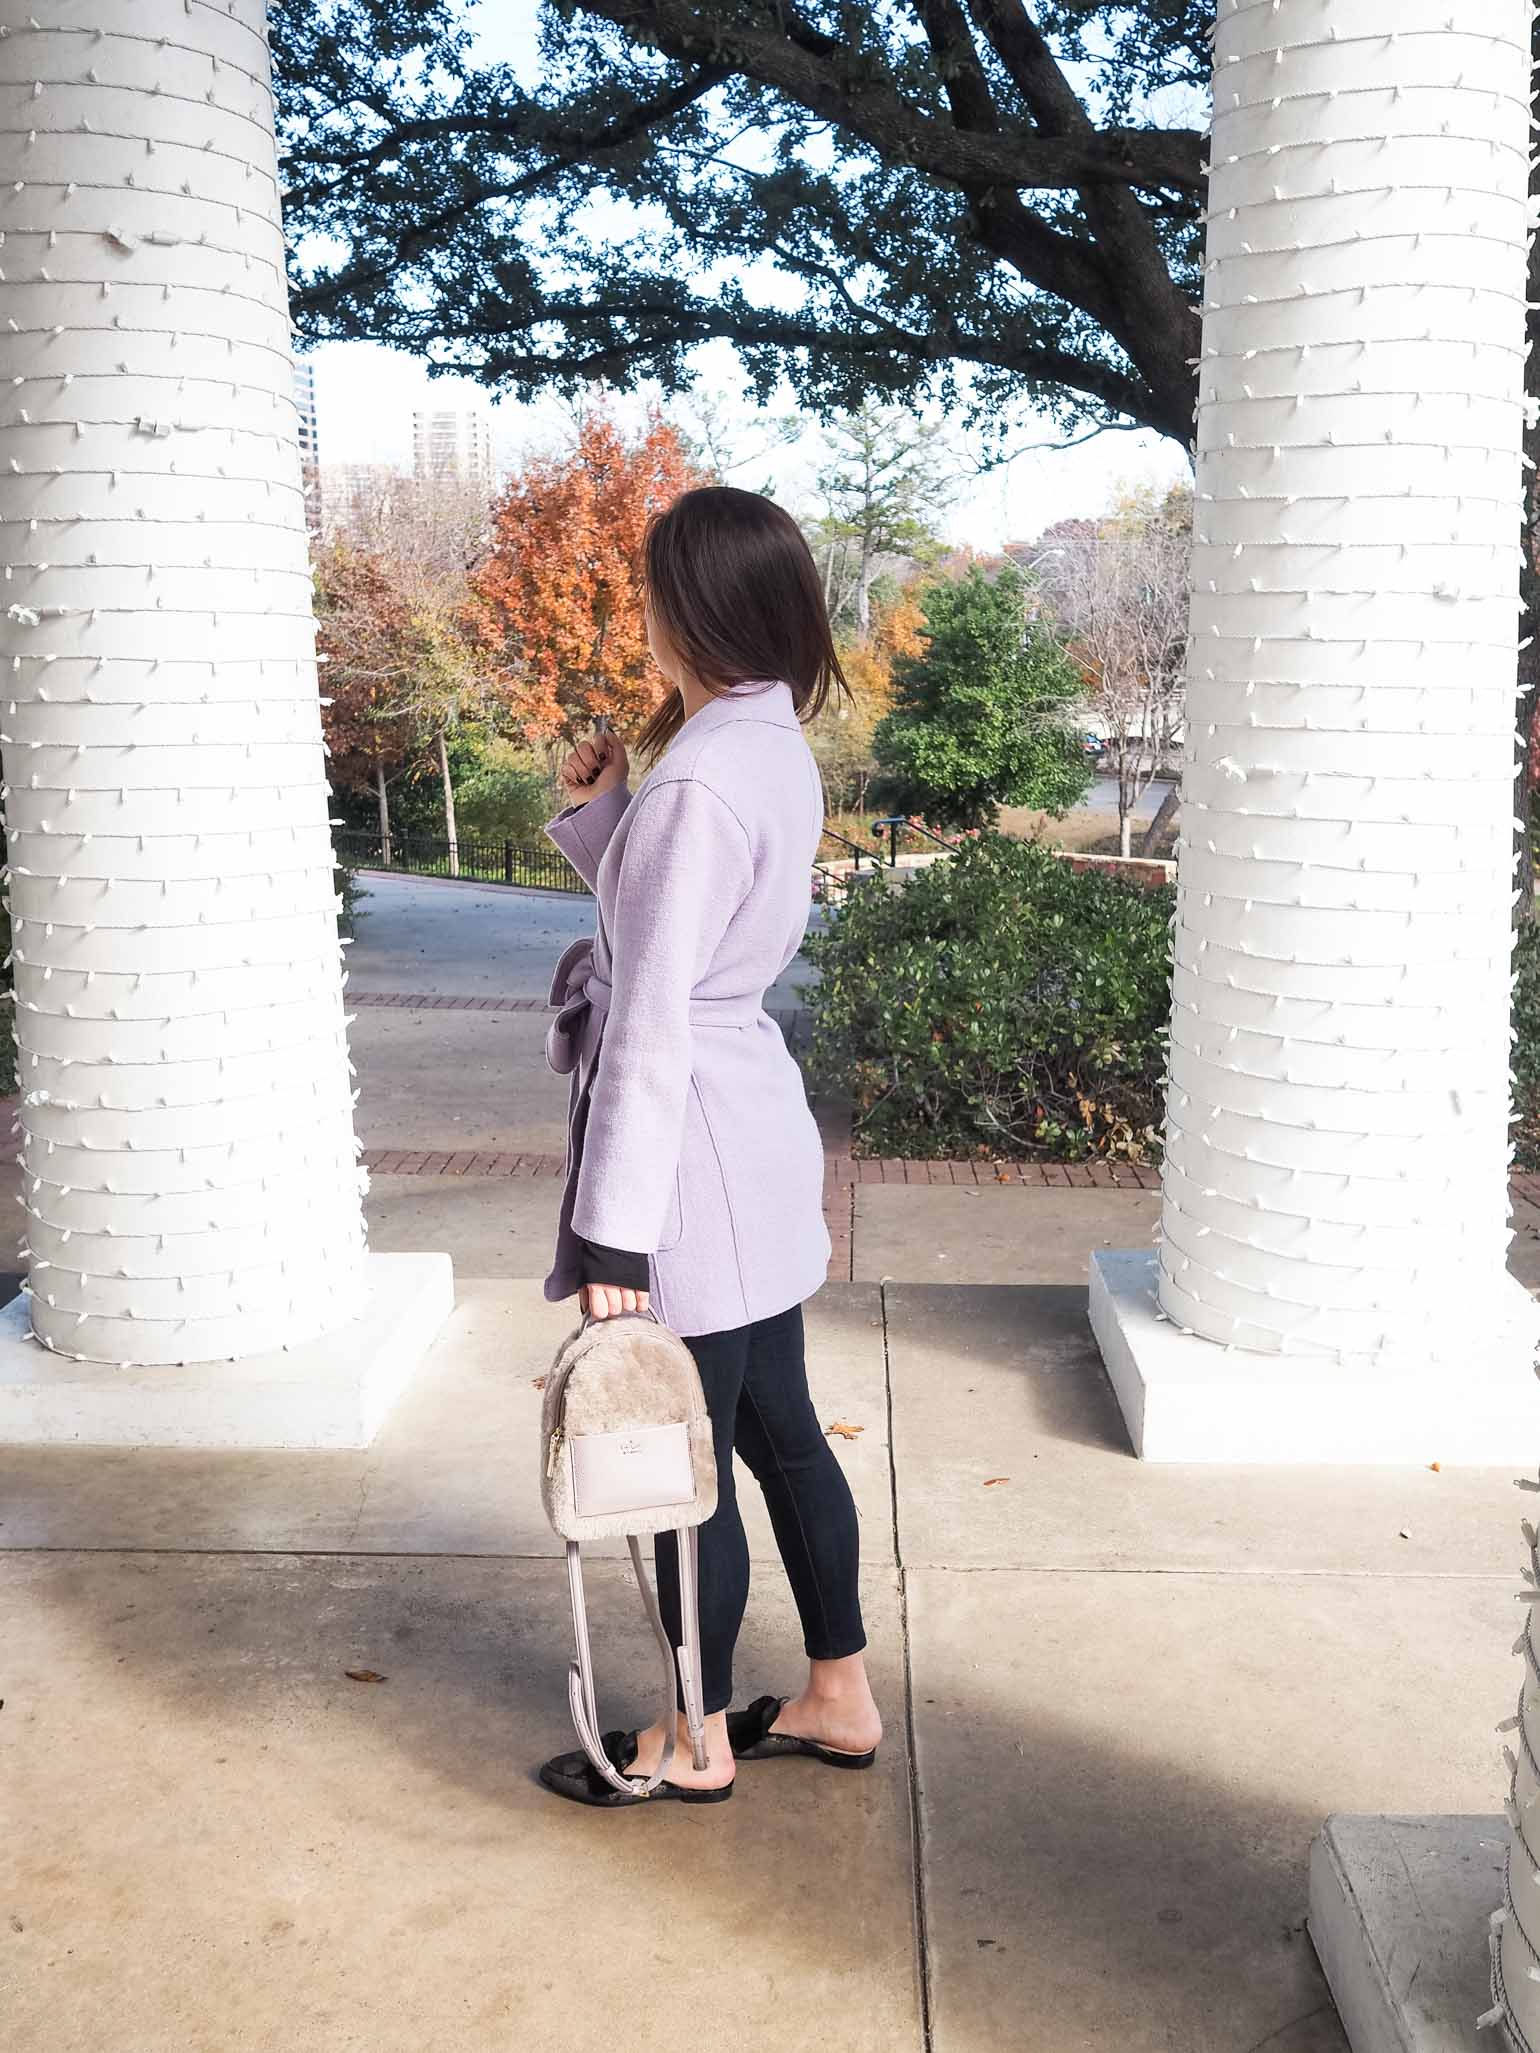 Cristina from The Brunette Nomad, Dallas fashion blogger, shows how to style this Kate Spade mini backpack 